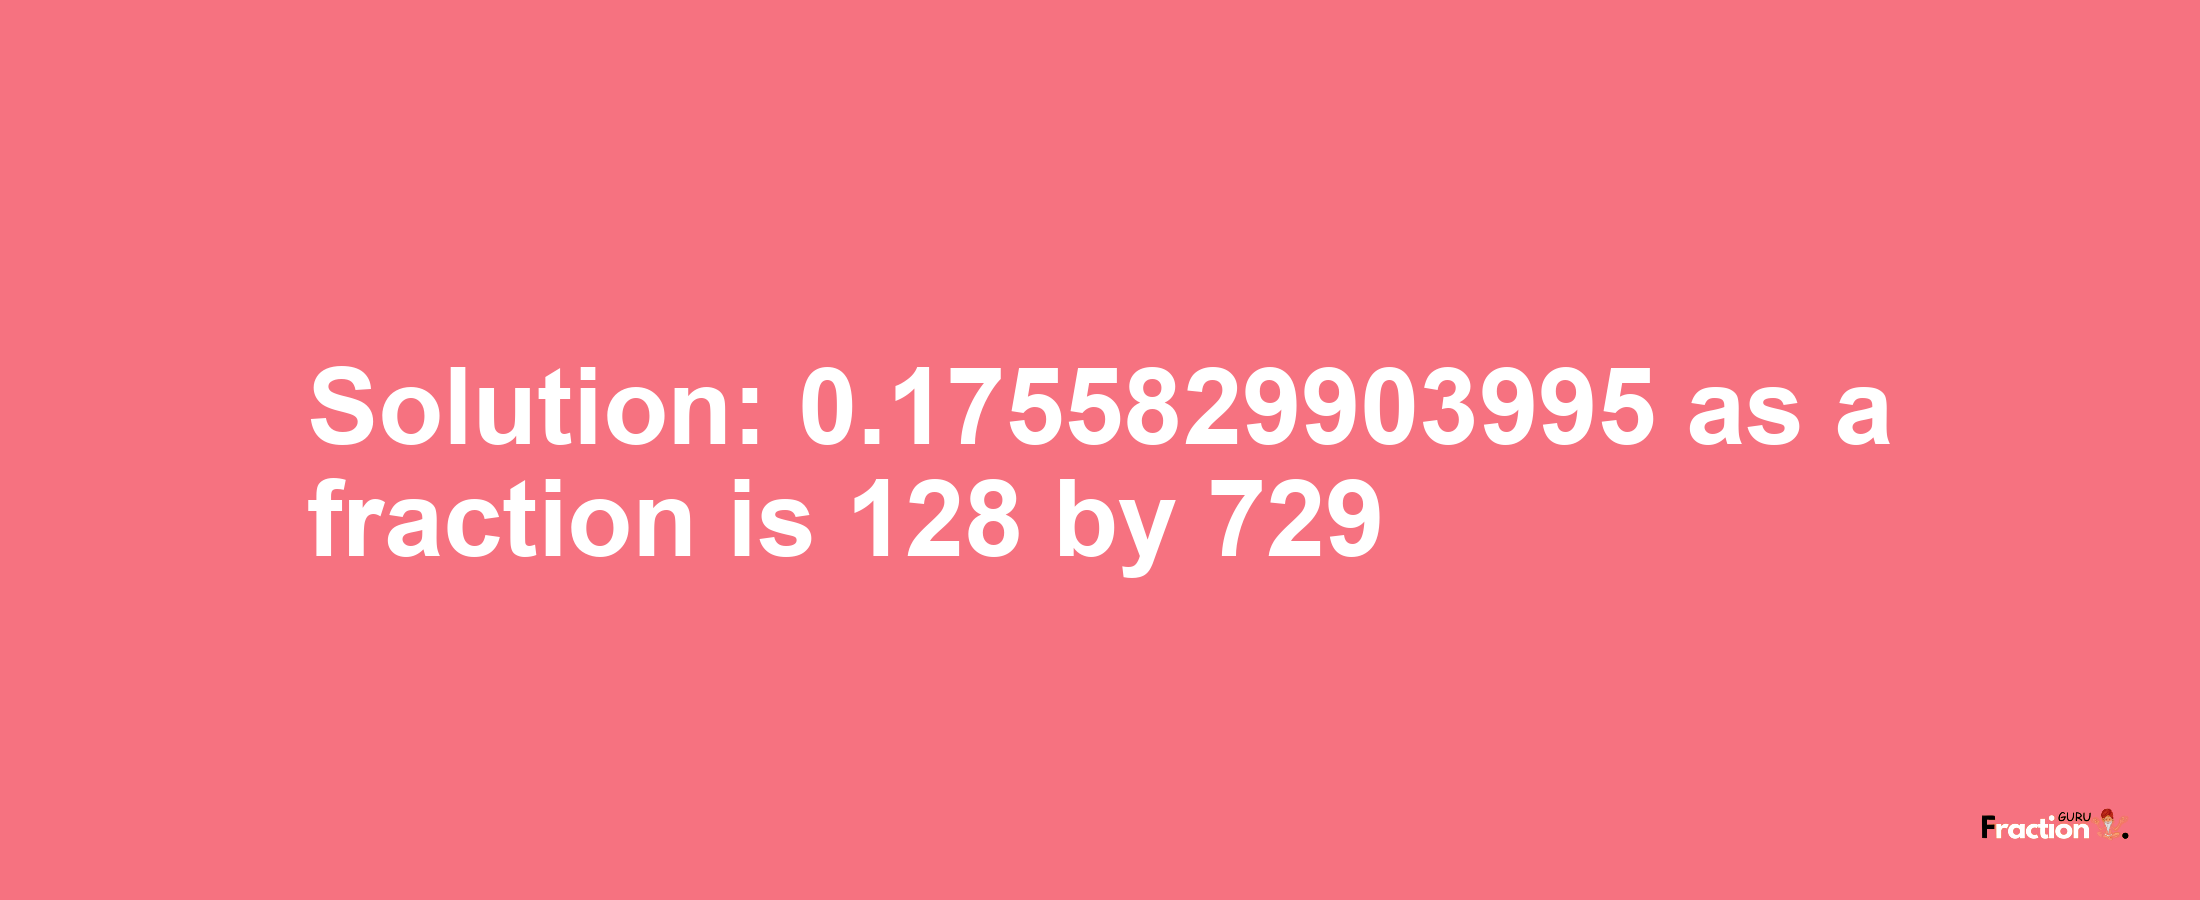 Solution:0.1755829903995 as a fraction is 128/729